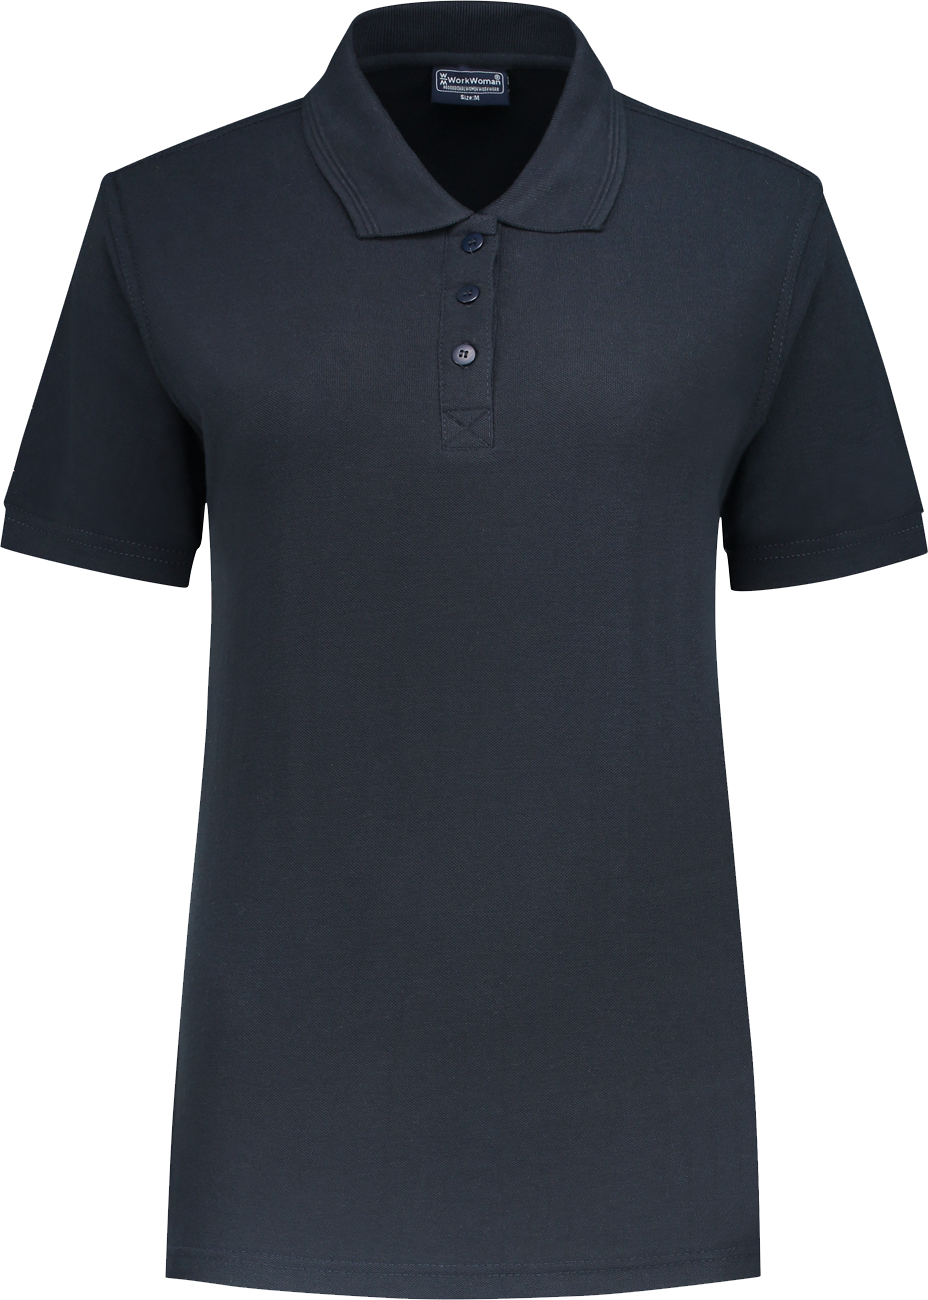 81021 Poloshirt Outfitters Ladies Navy